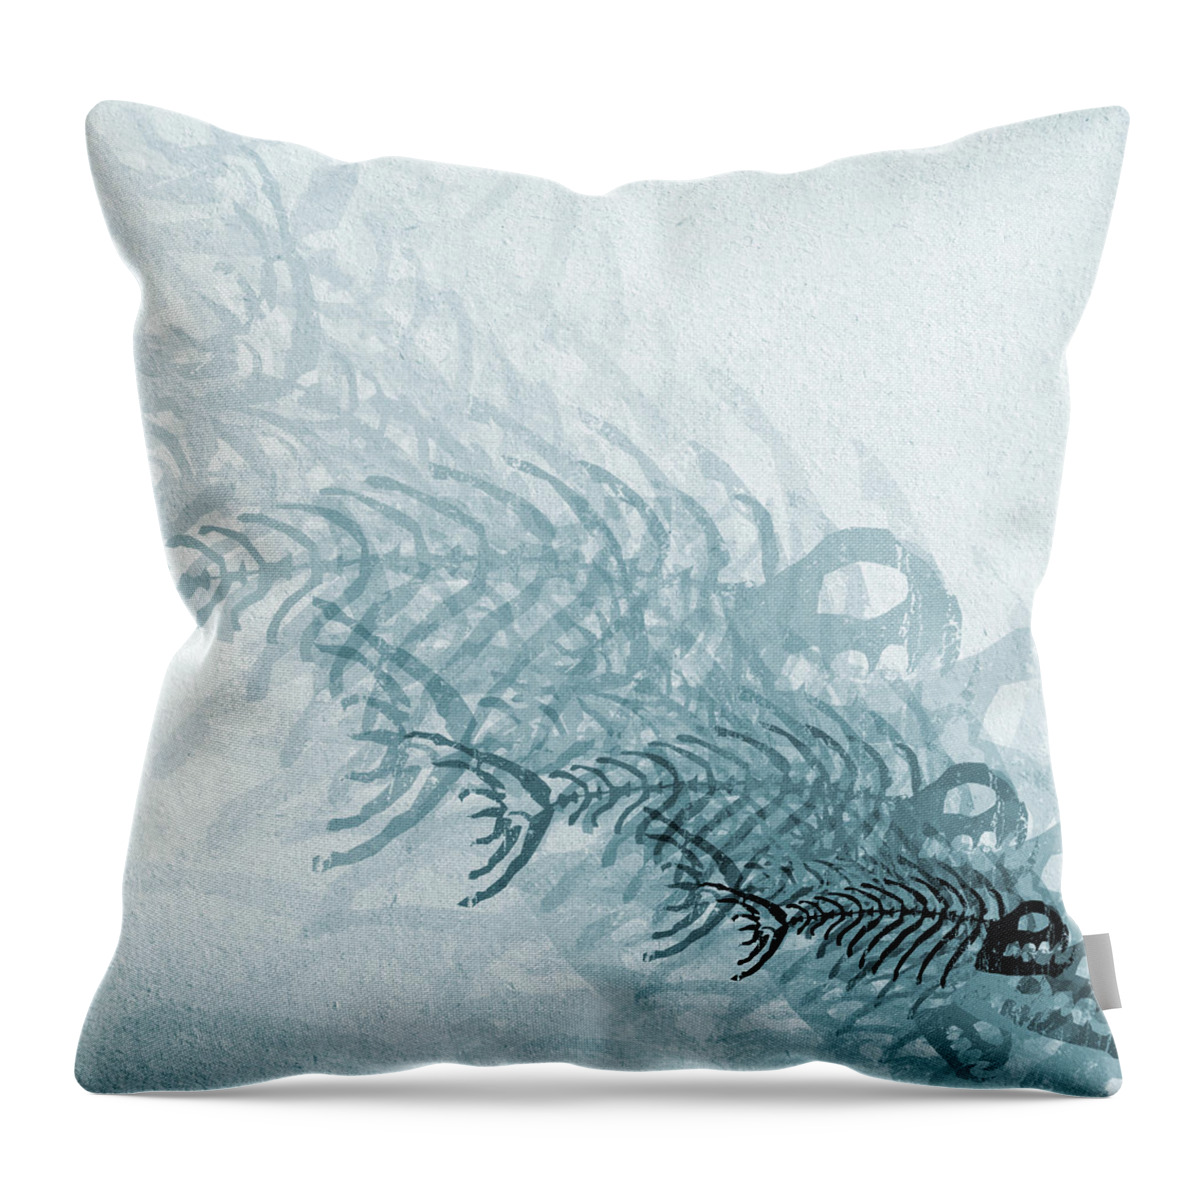 Fish Throw Pillow featuring the digital art Fish And Bones by Phil Perkins